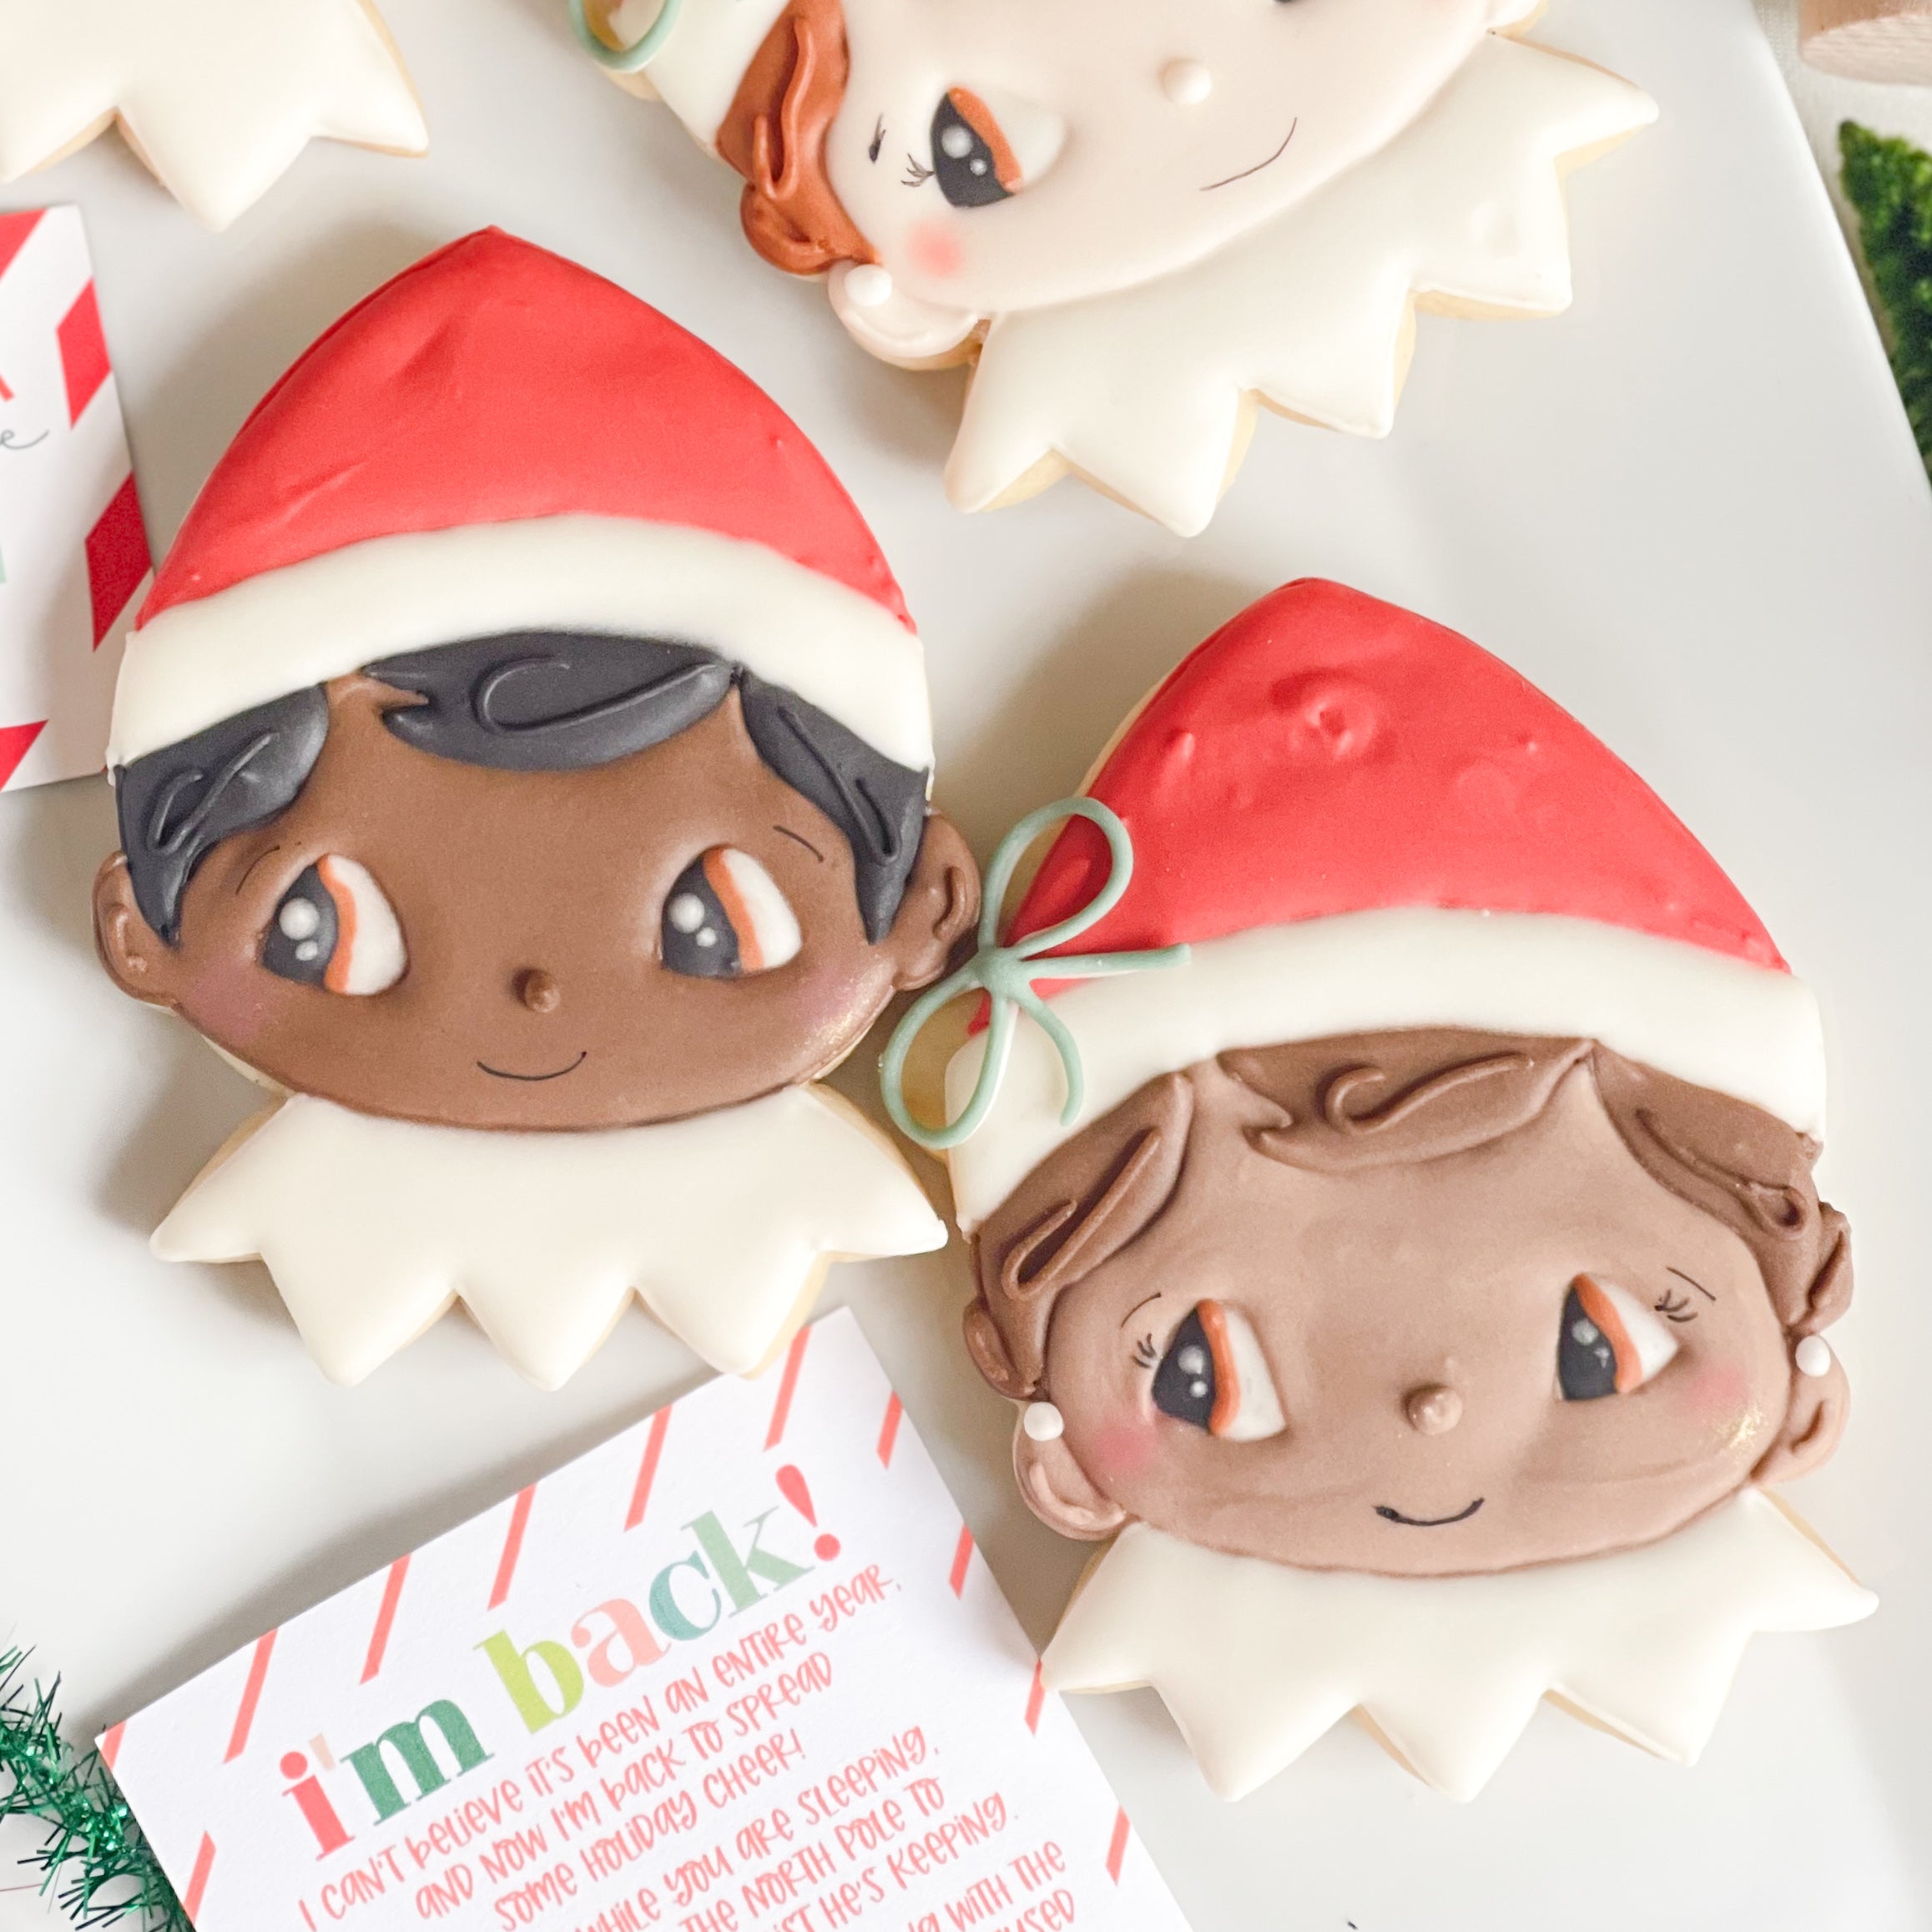 Personalized Elf Cookie